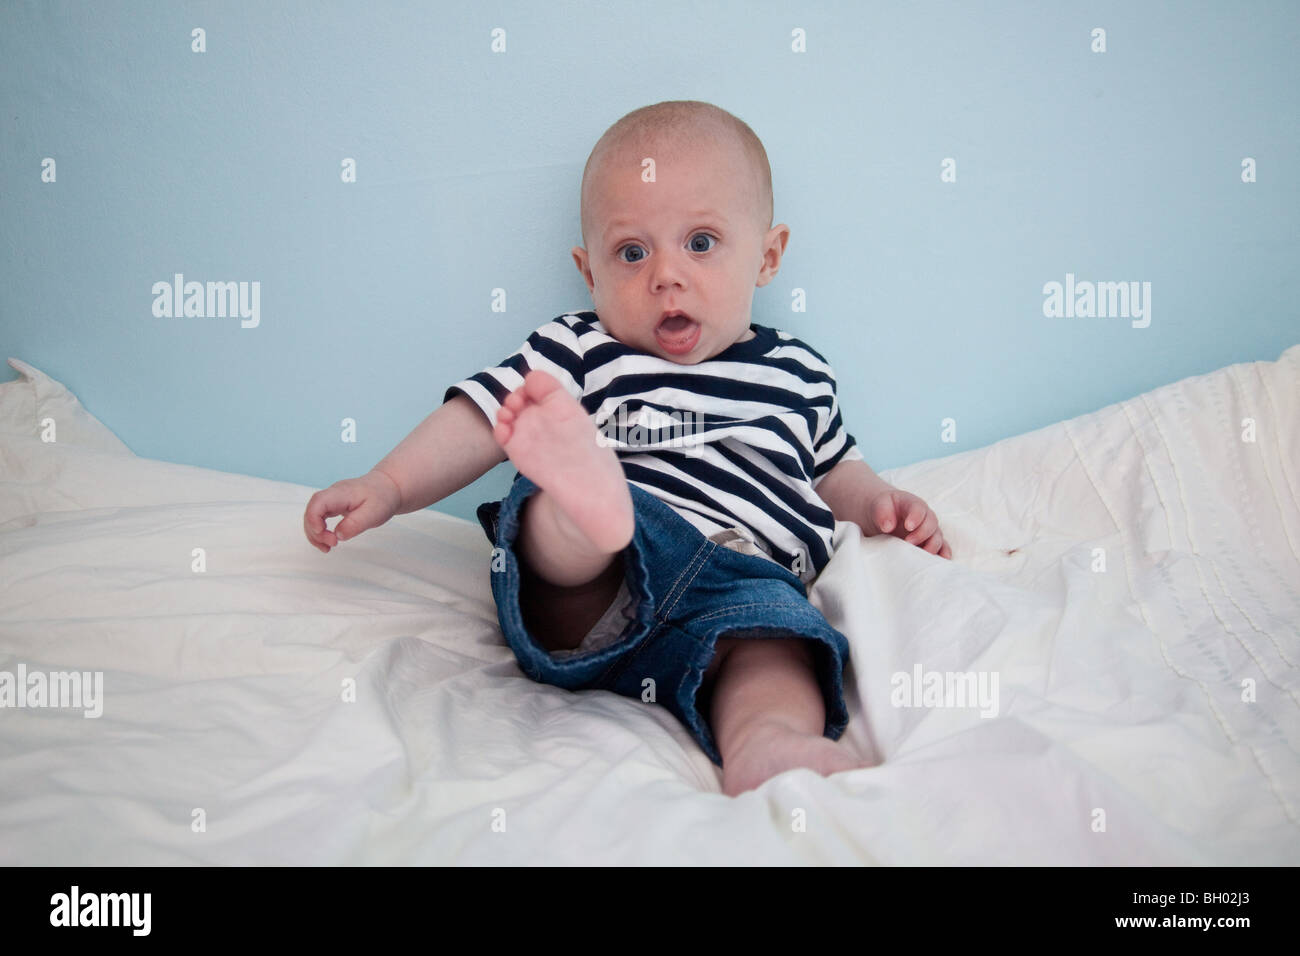 https://c8.alamy.com/comp/BH02J3/four-month-old-baby-boy-looking-at-the-camera-london-england-BH02J3.jpg